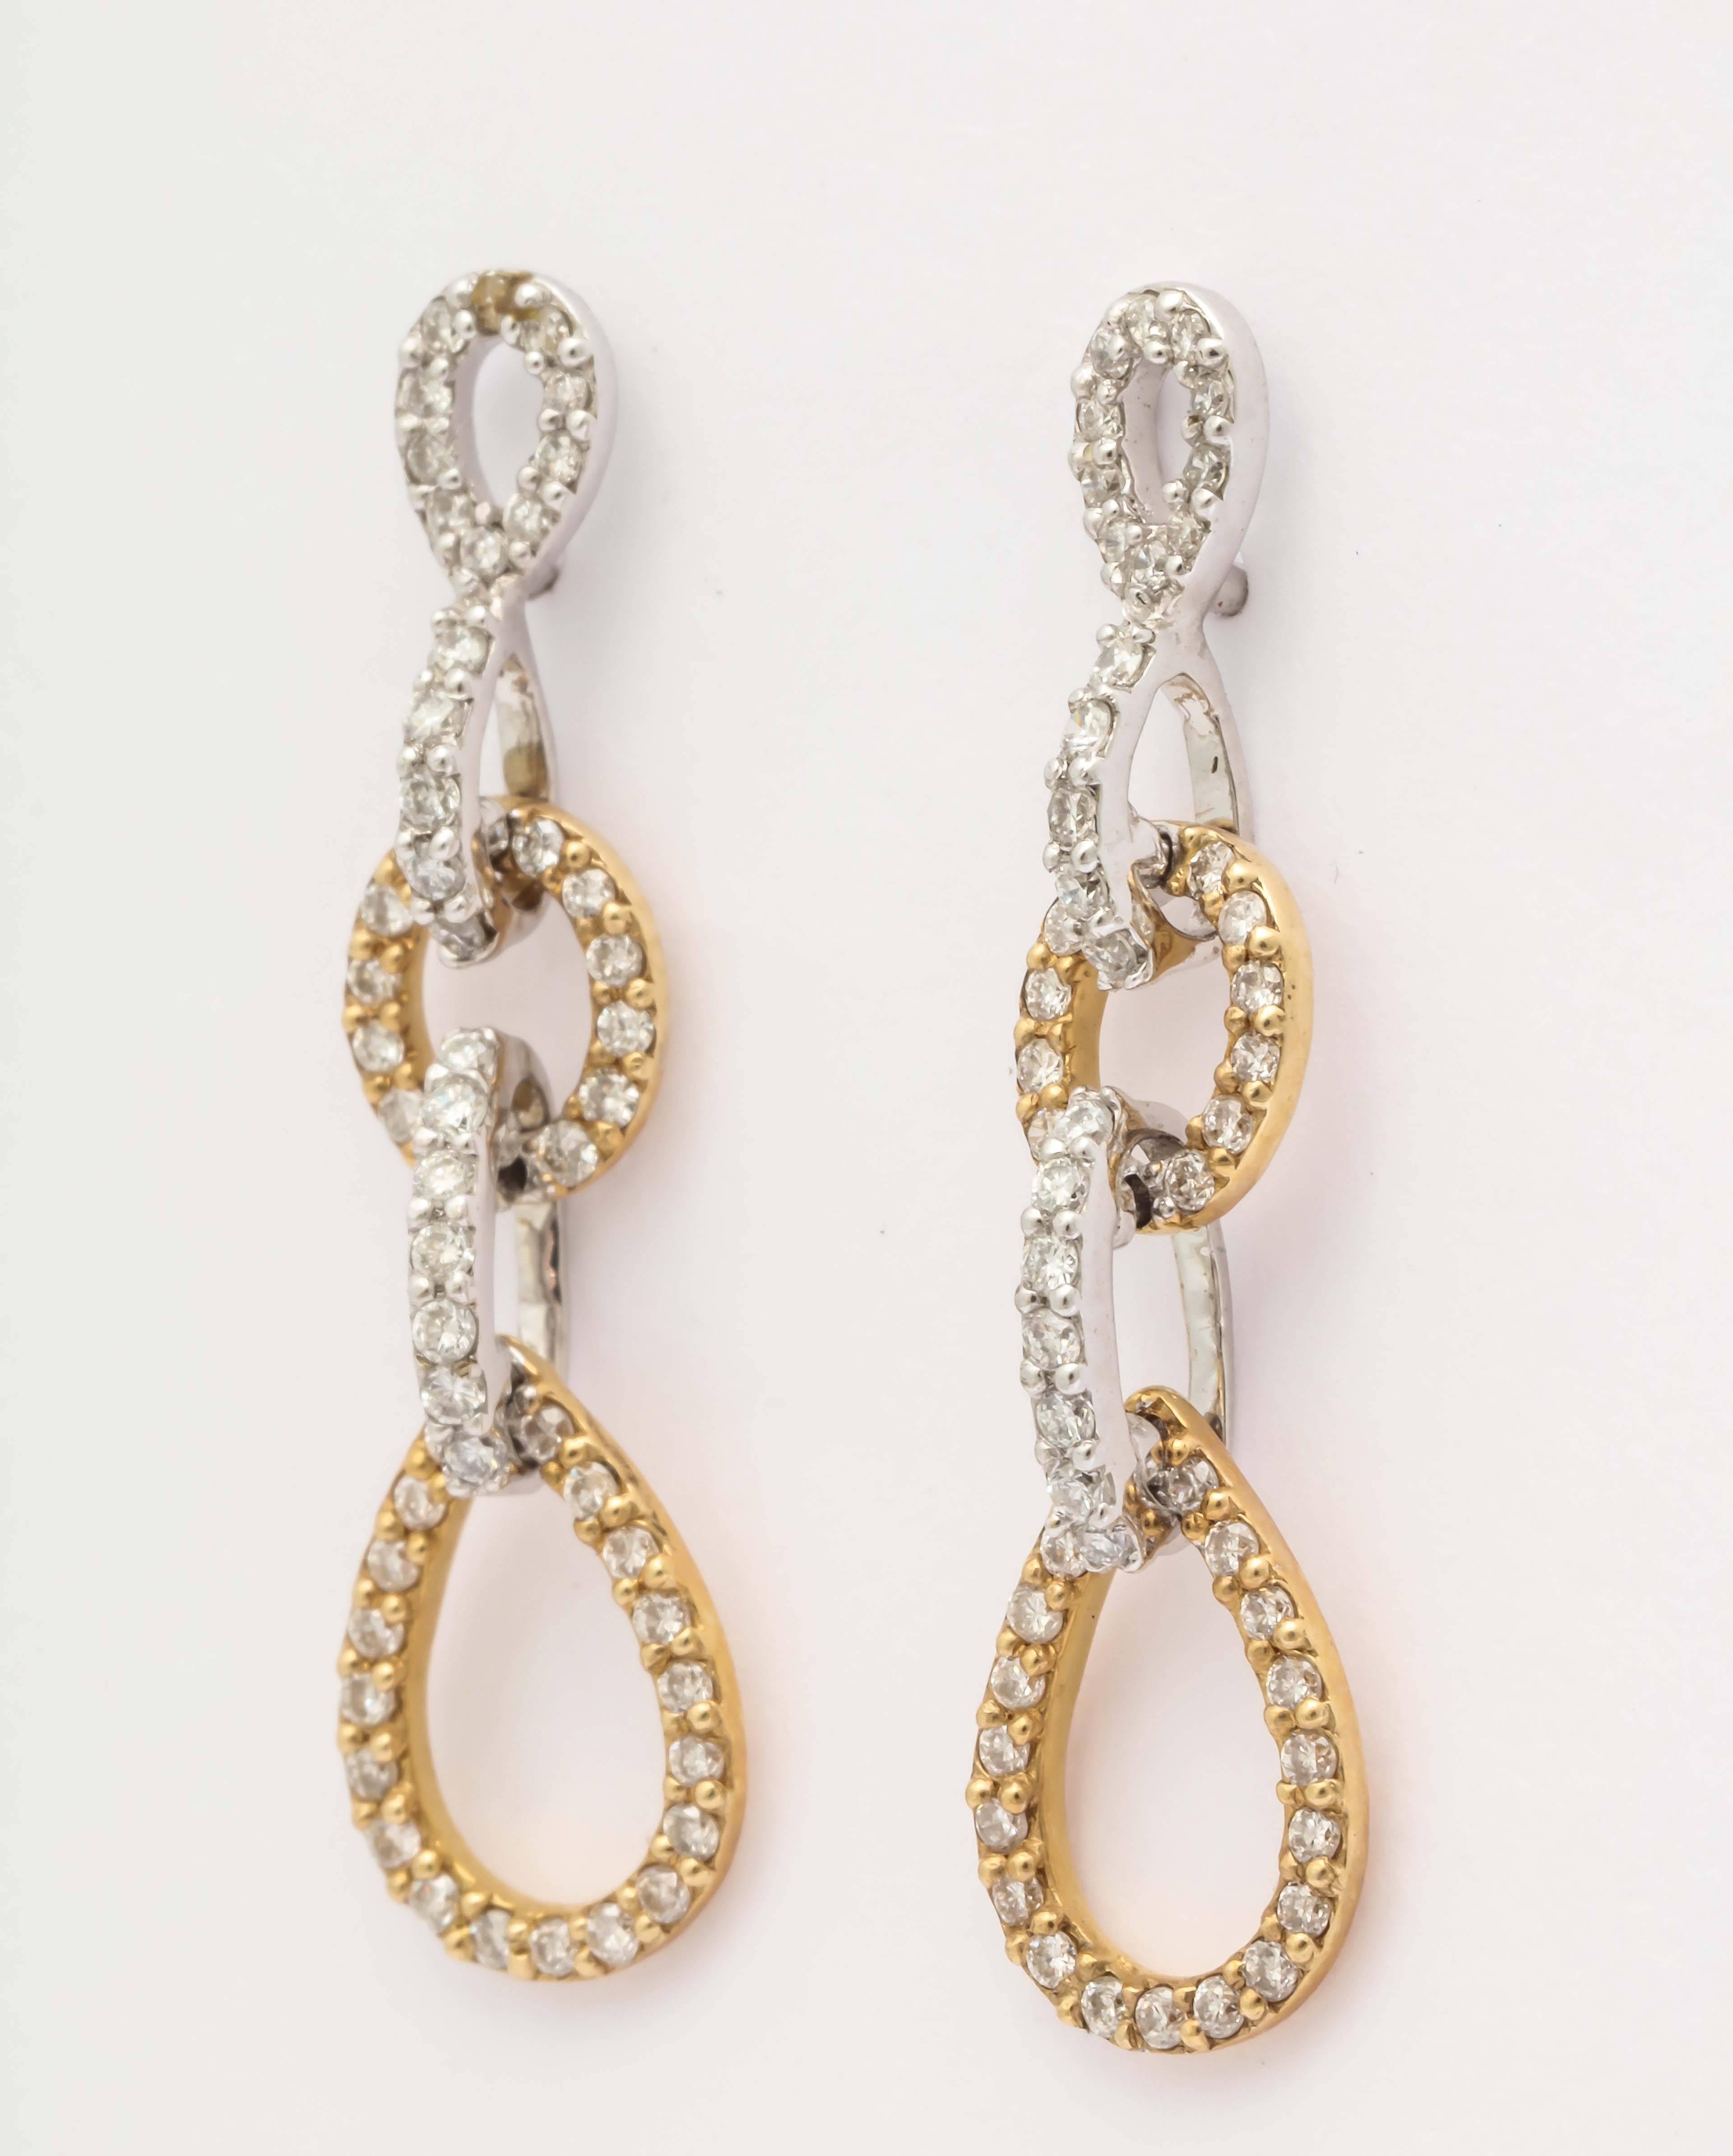 The earrings are microset diamonds in yellow and white 14 kt gold. The diamond weight is 1.26 cts. The length of the earrings is 30 mm long and 8 mm wide at the bottom. Perfect for a refined and elegant woman. 